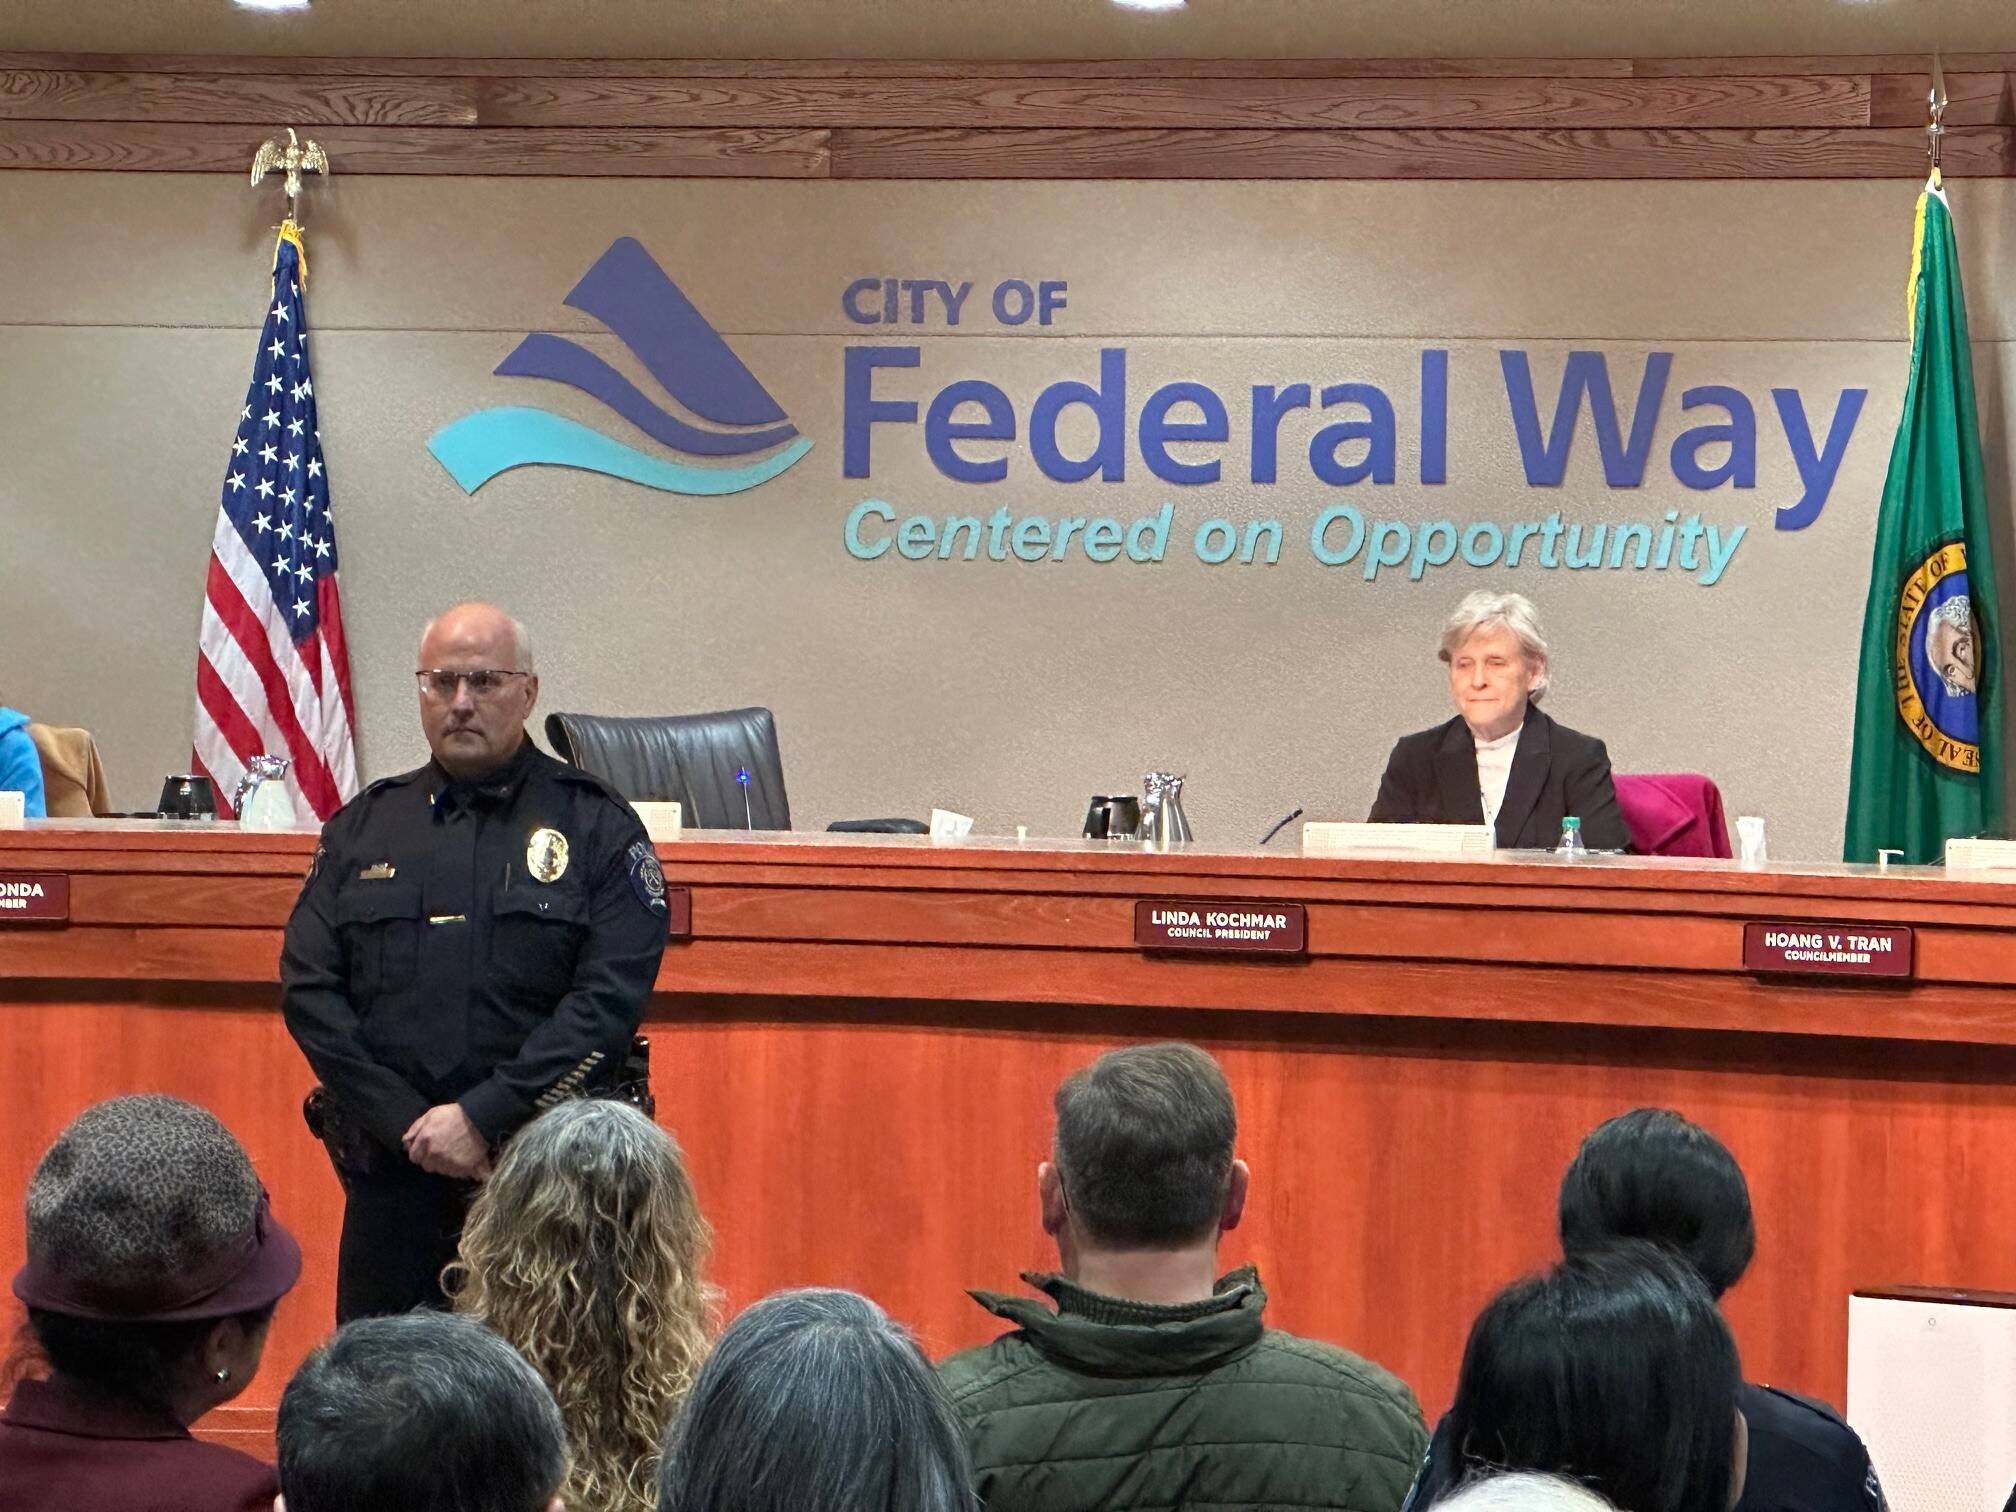 Photo by David Solano / City of Federal Way
Lt. Bryan Klingele was promoted to commander and sworn in as such at the council meeting.